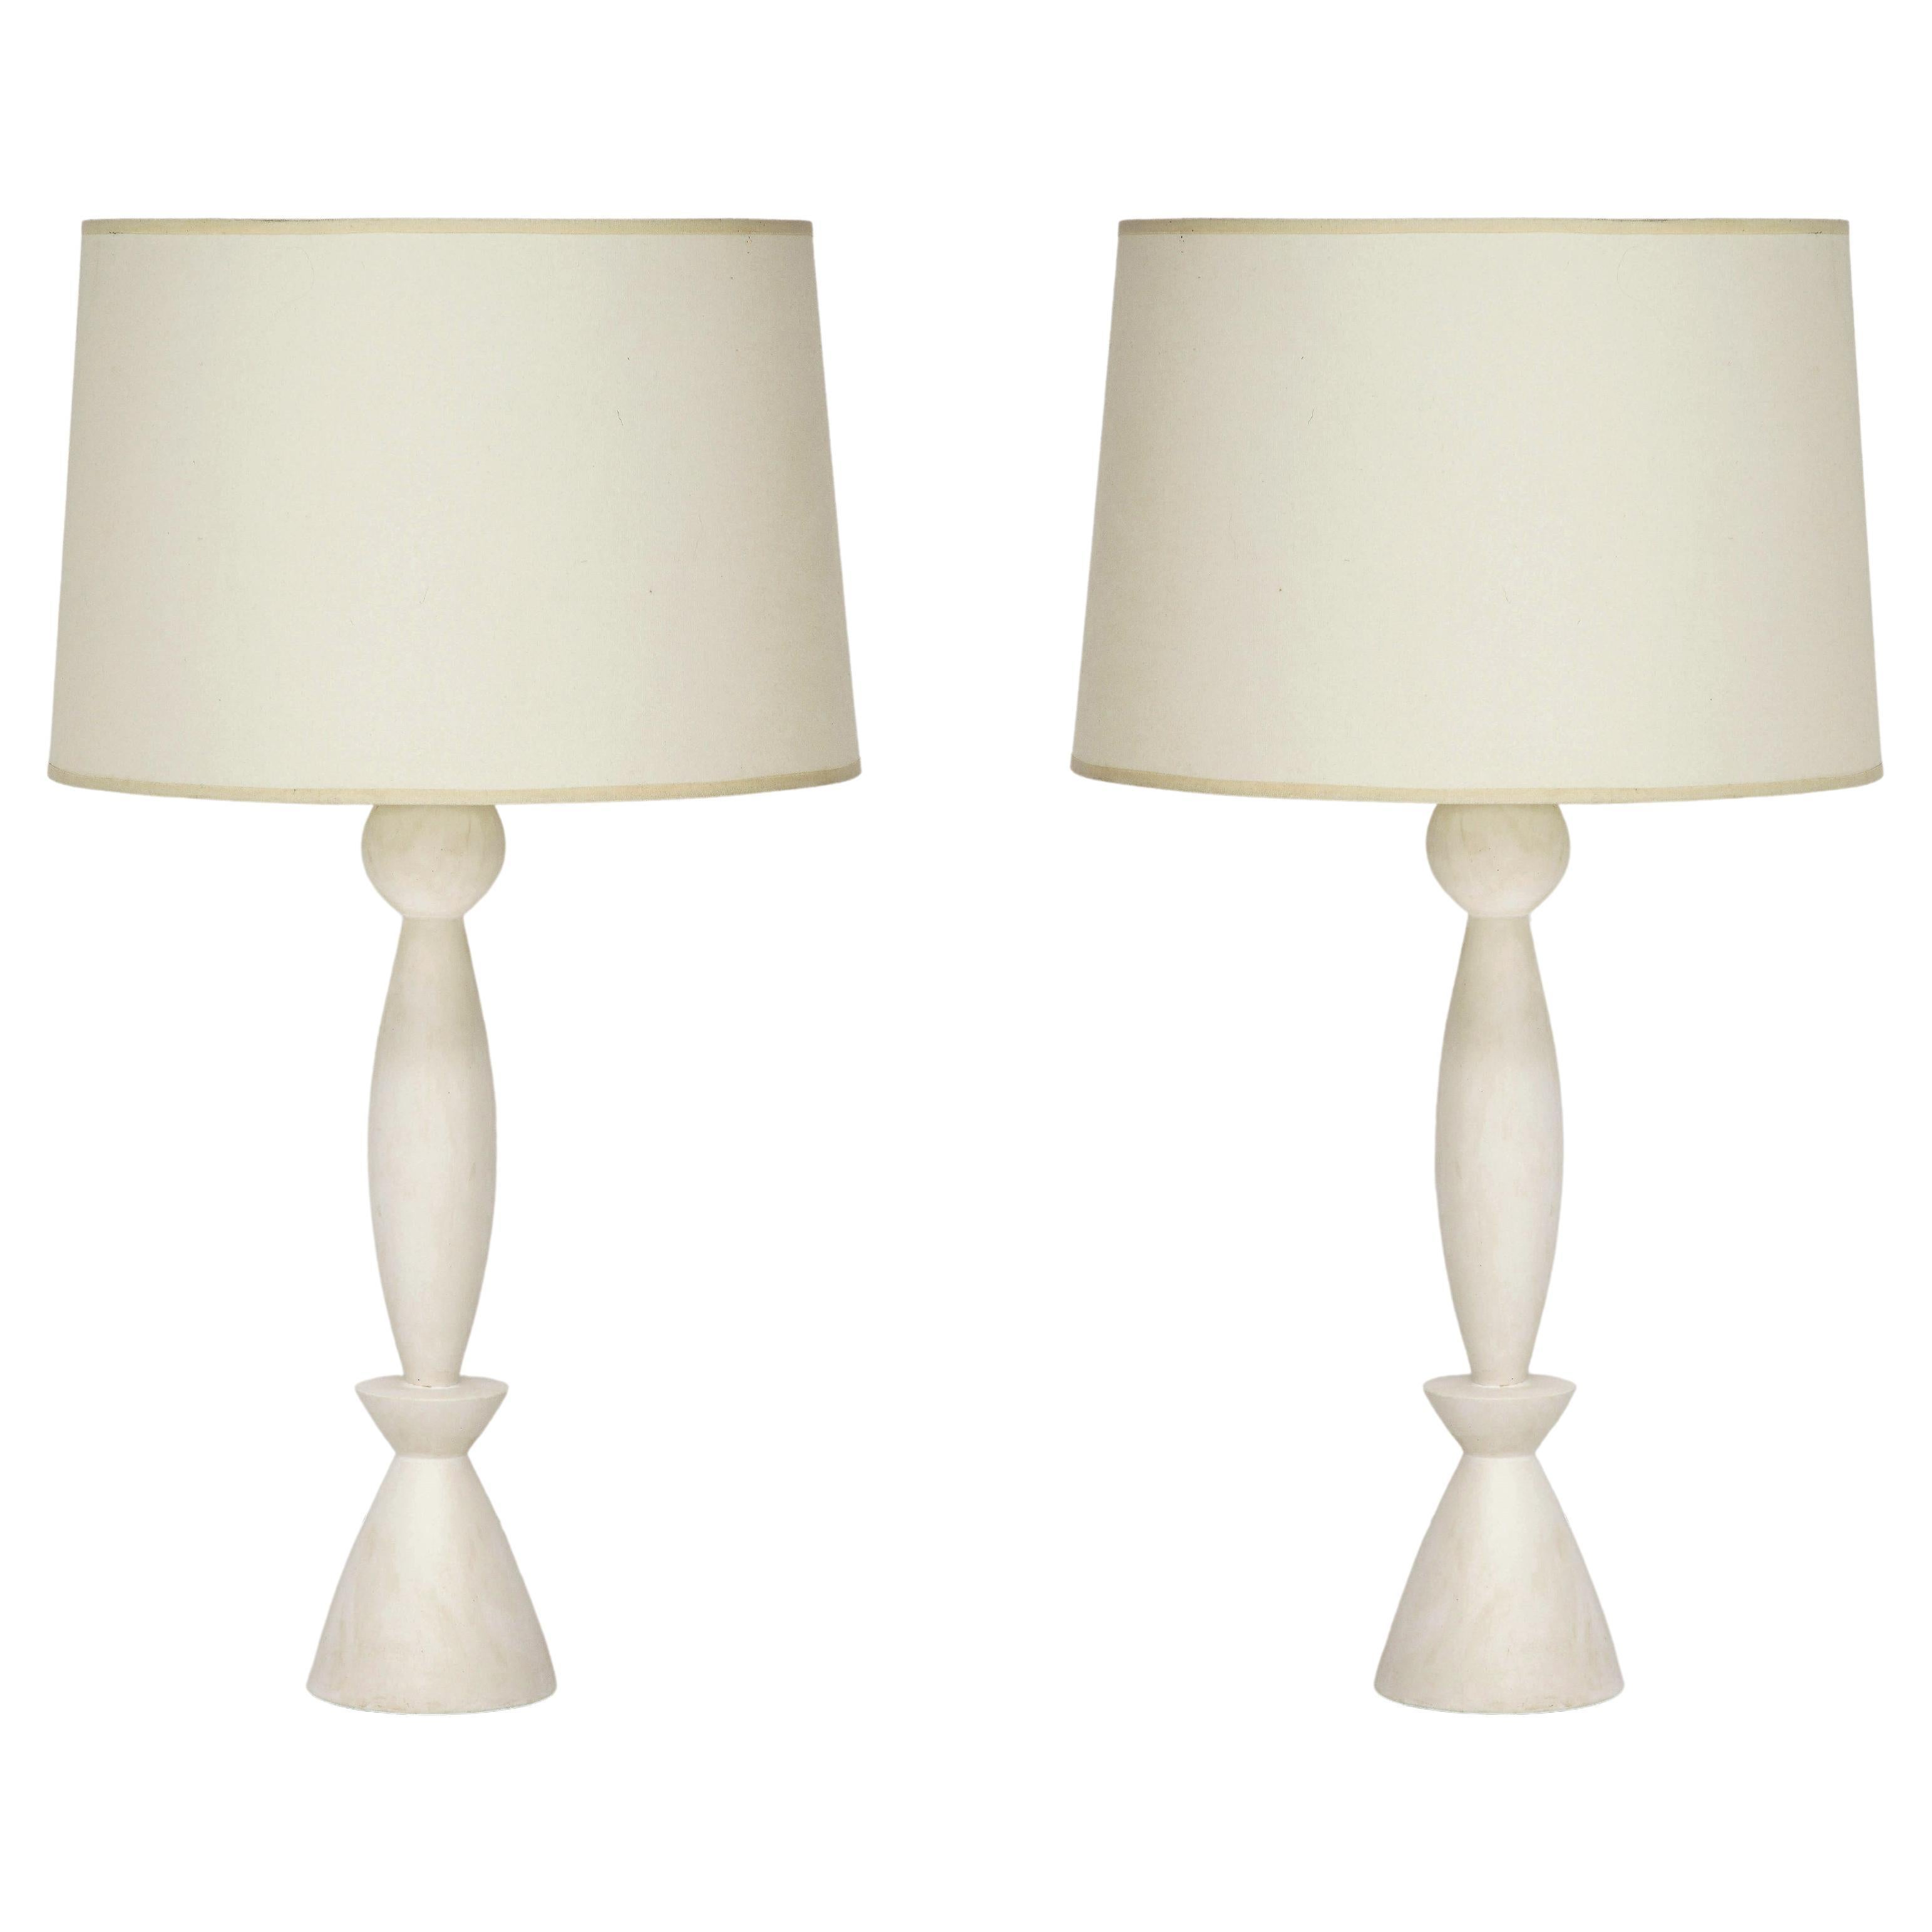 Pair of "Quille" Crème Patinated Plaster Table Lamps by Facto Atelier Paris